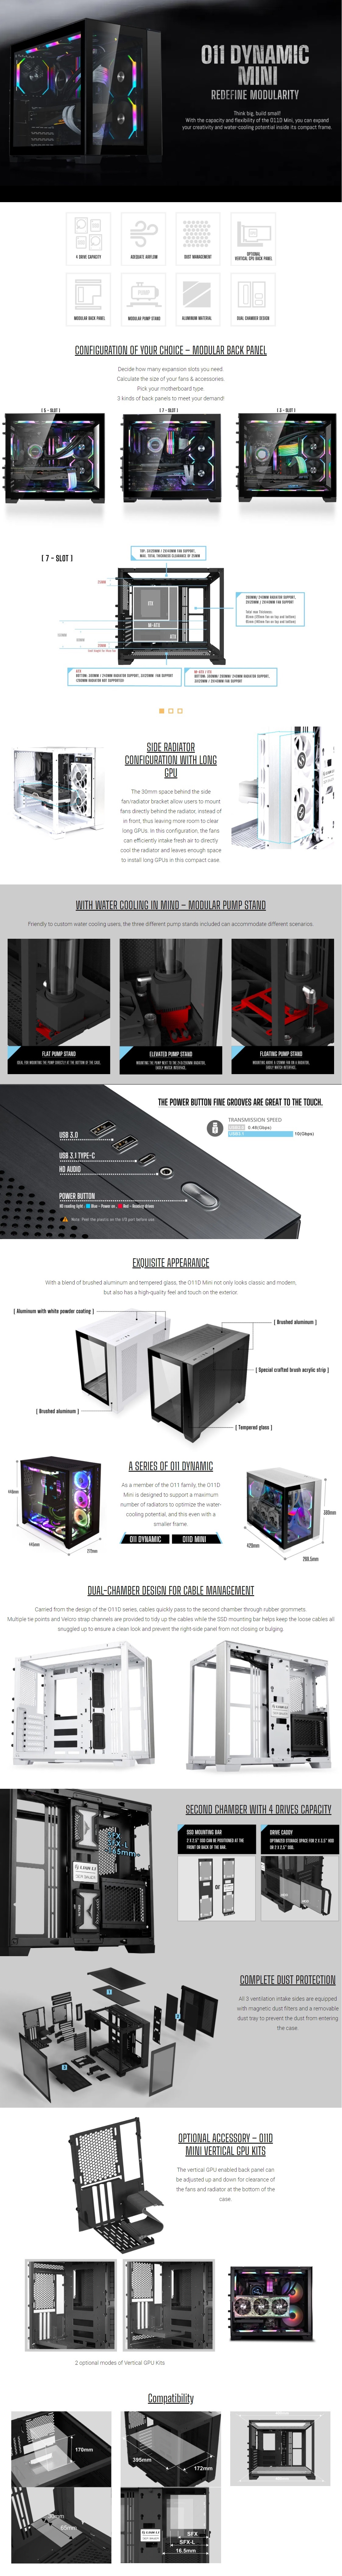 A large marketing image providing additional information about the product Lian Li O11 Dynamic Mini Mid Tower Case - Snow White - Additional alt info not provided